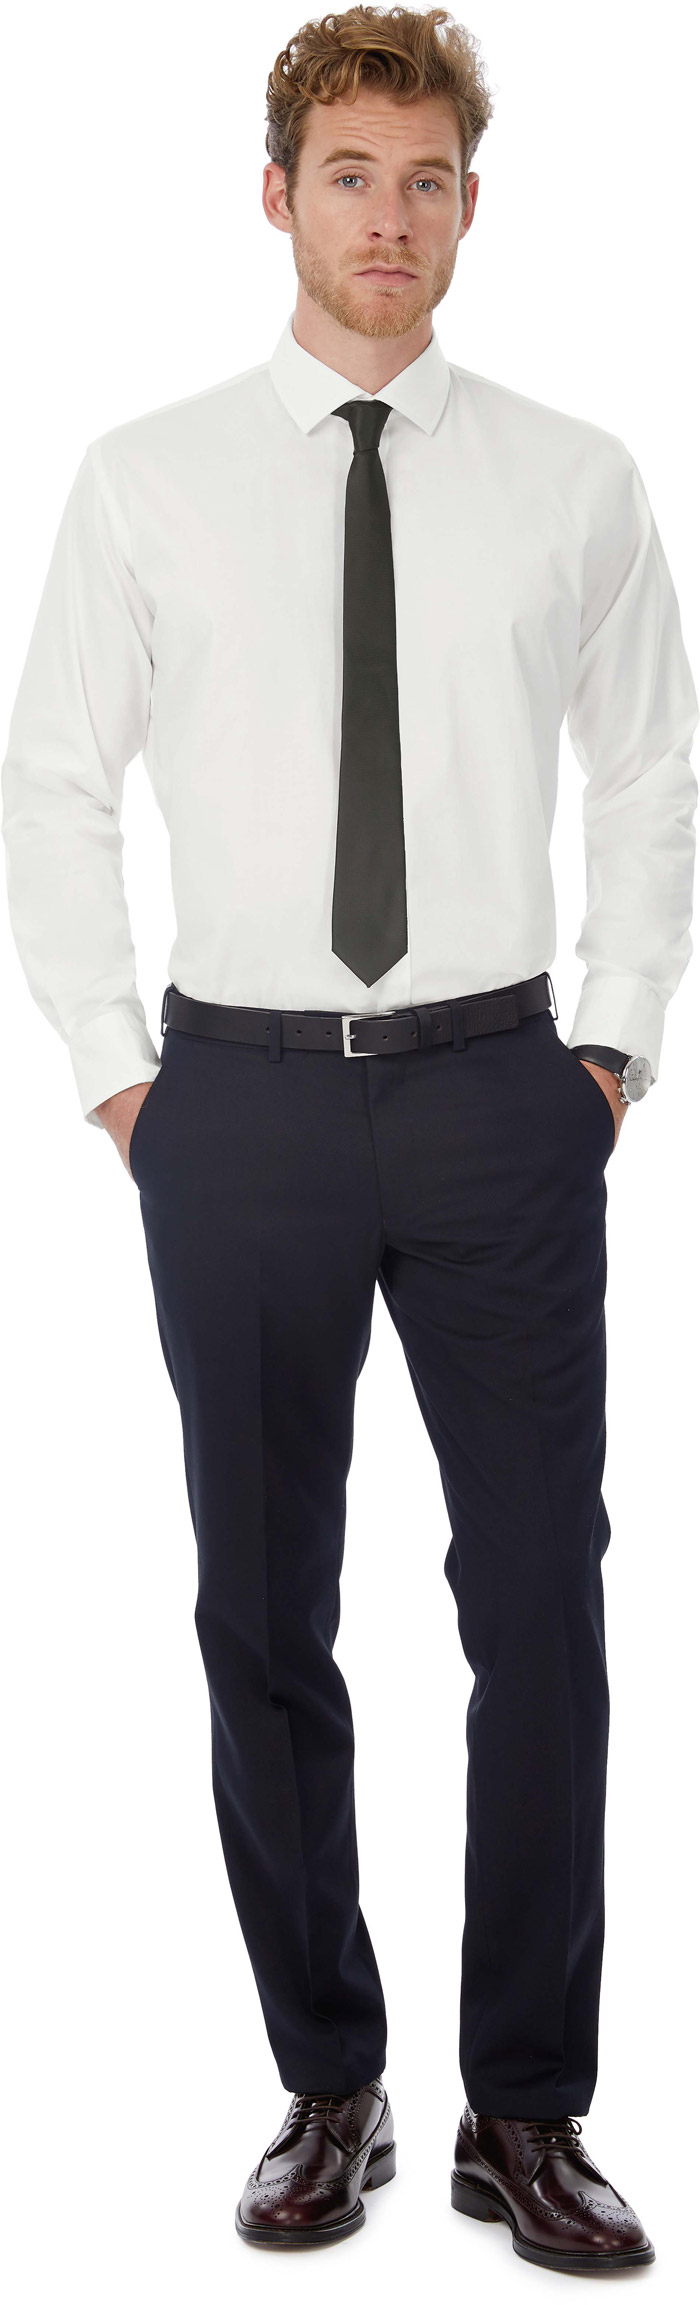 Chemise stretch homme manches longues black tie - CGSMP21